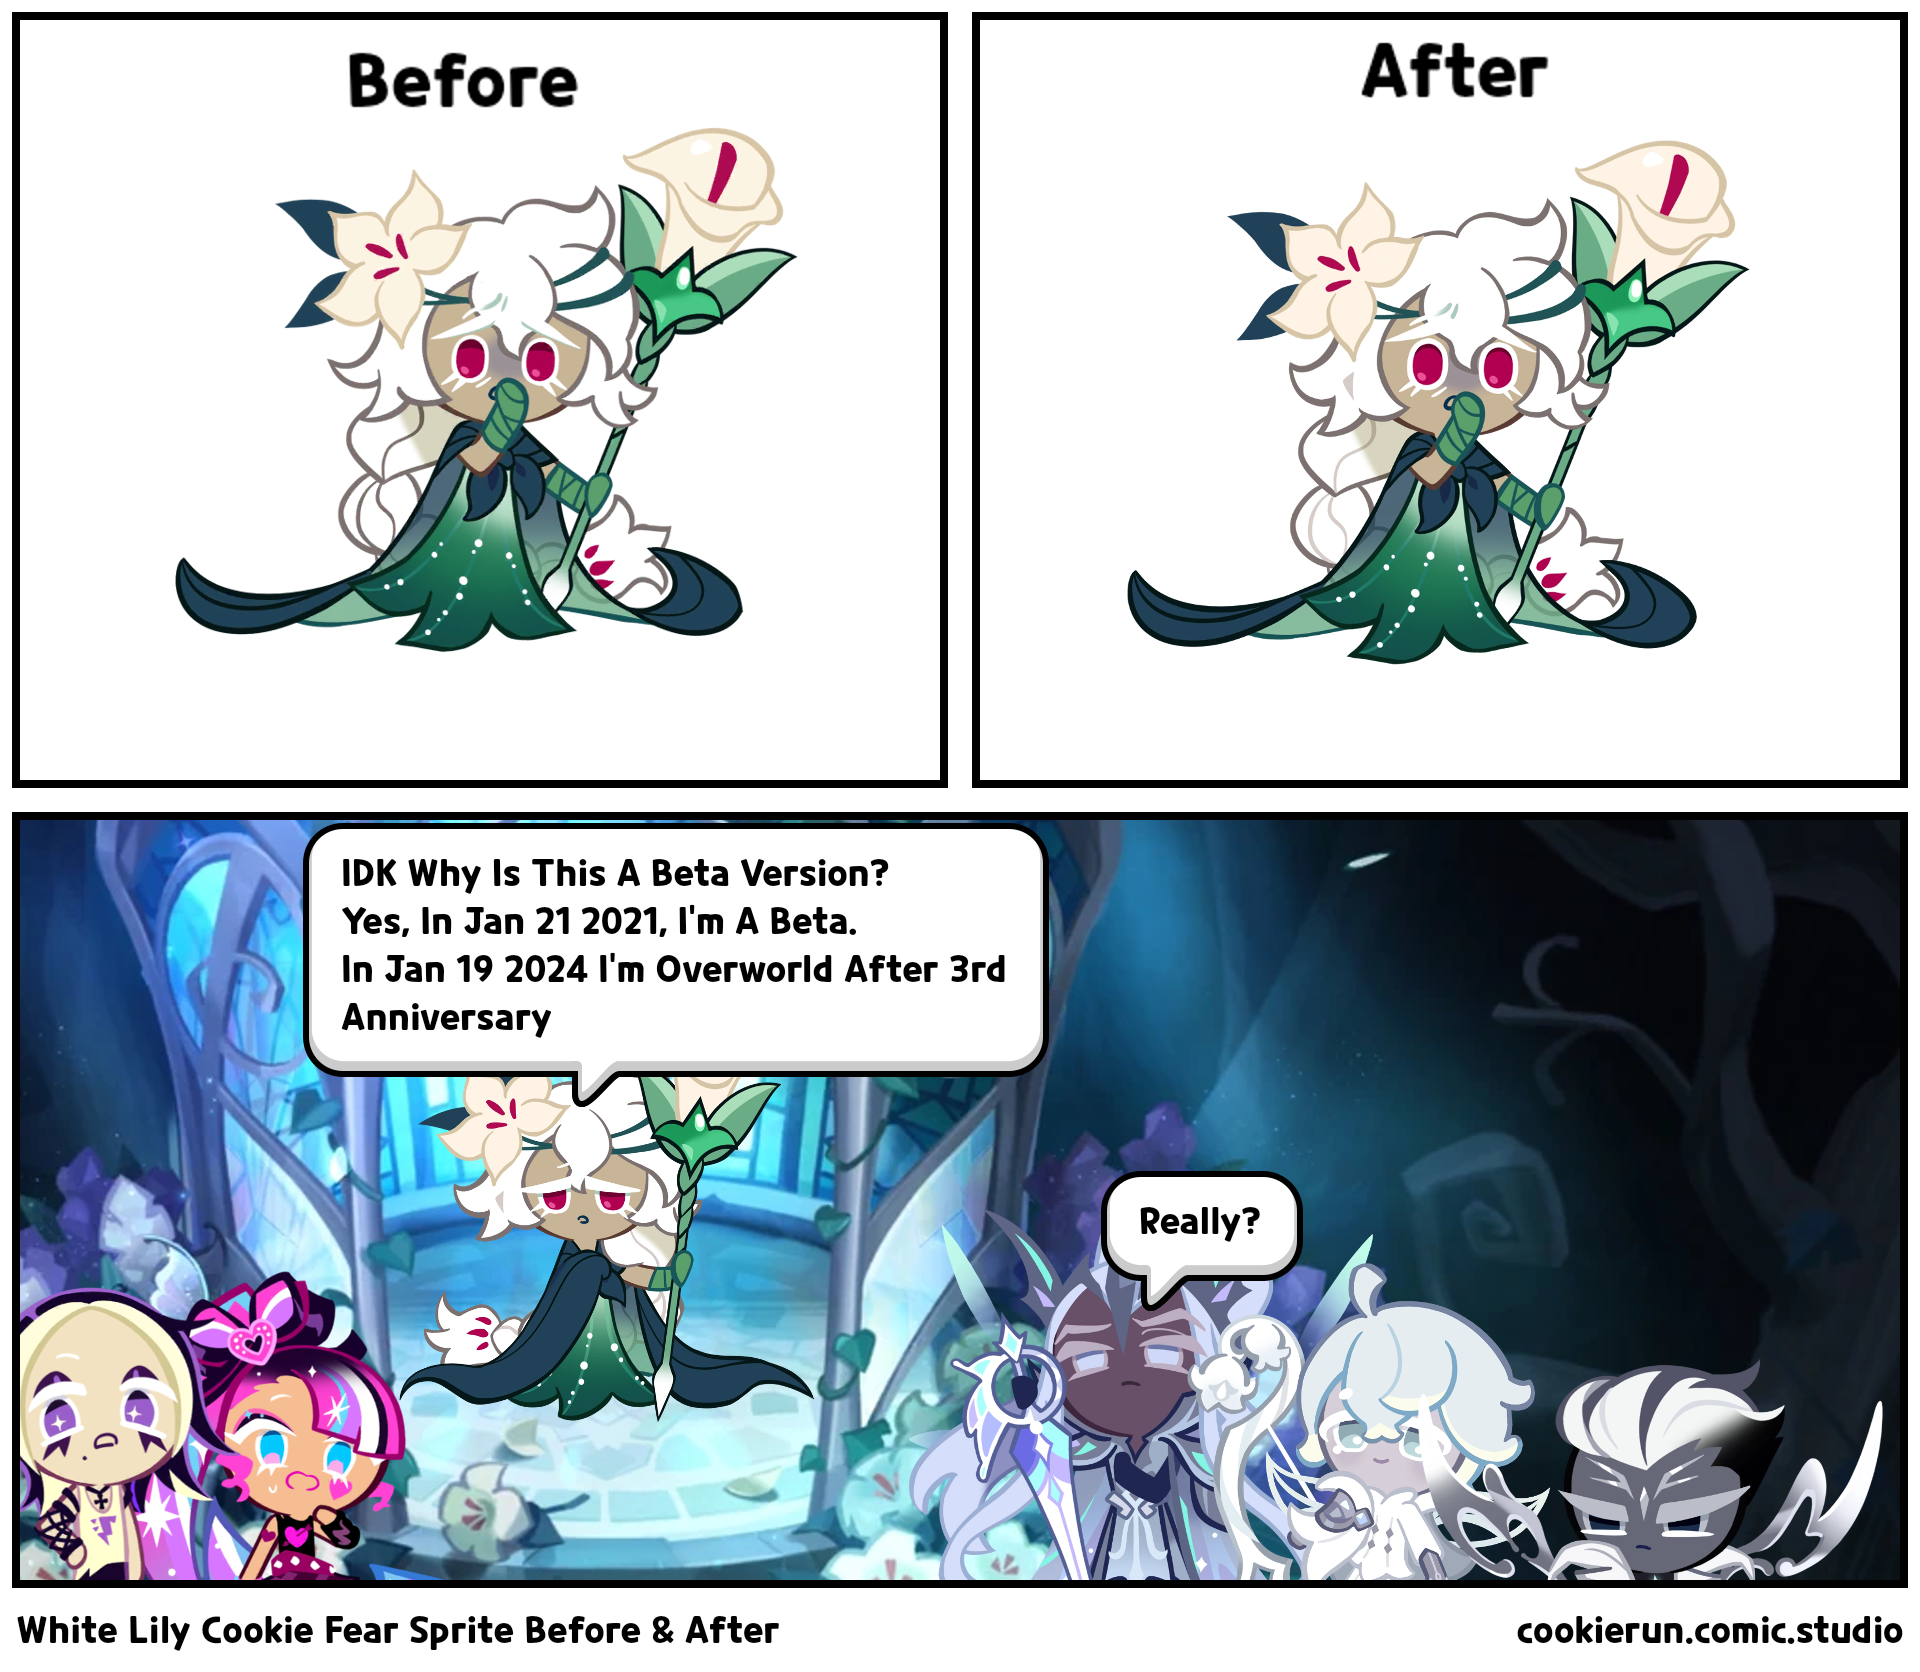 White Lily Cookie Fear Sprite Before & After